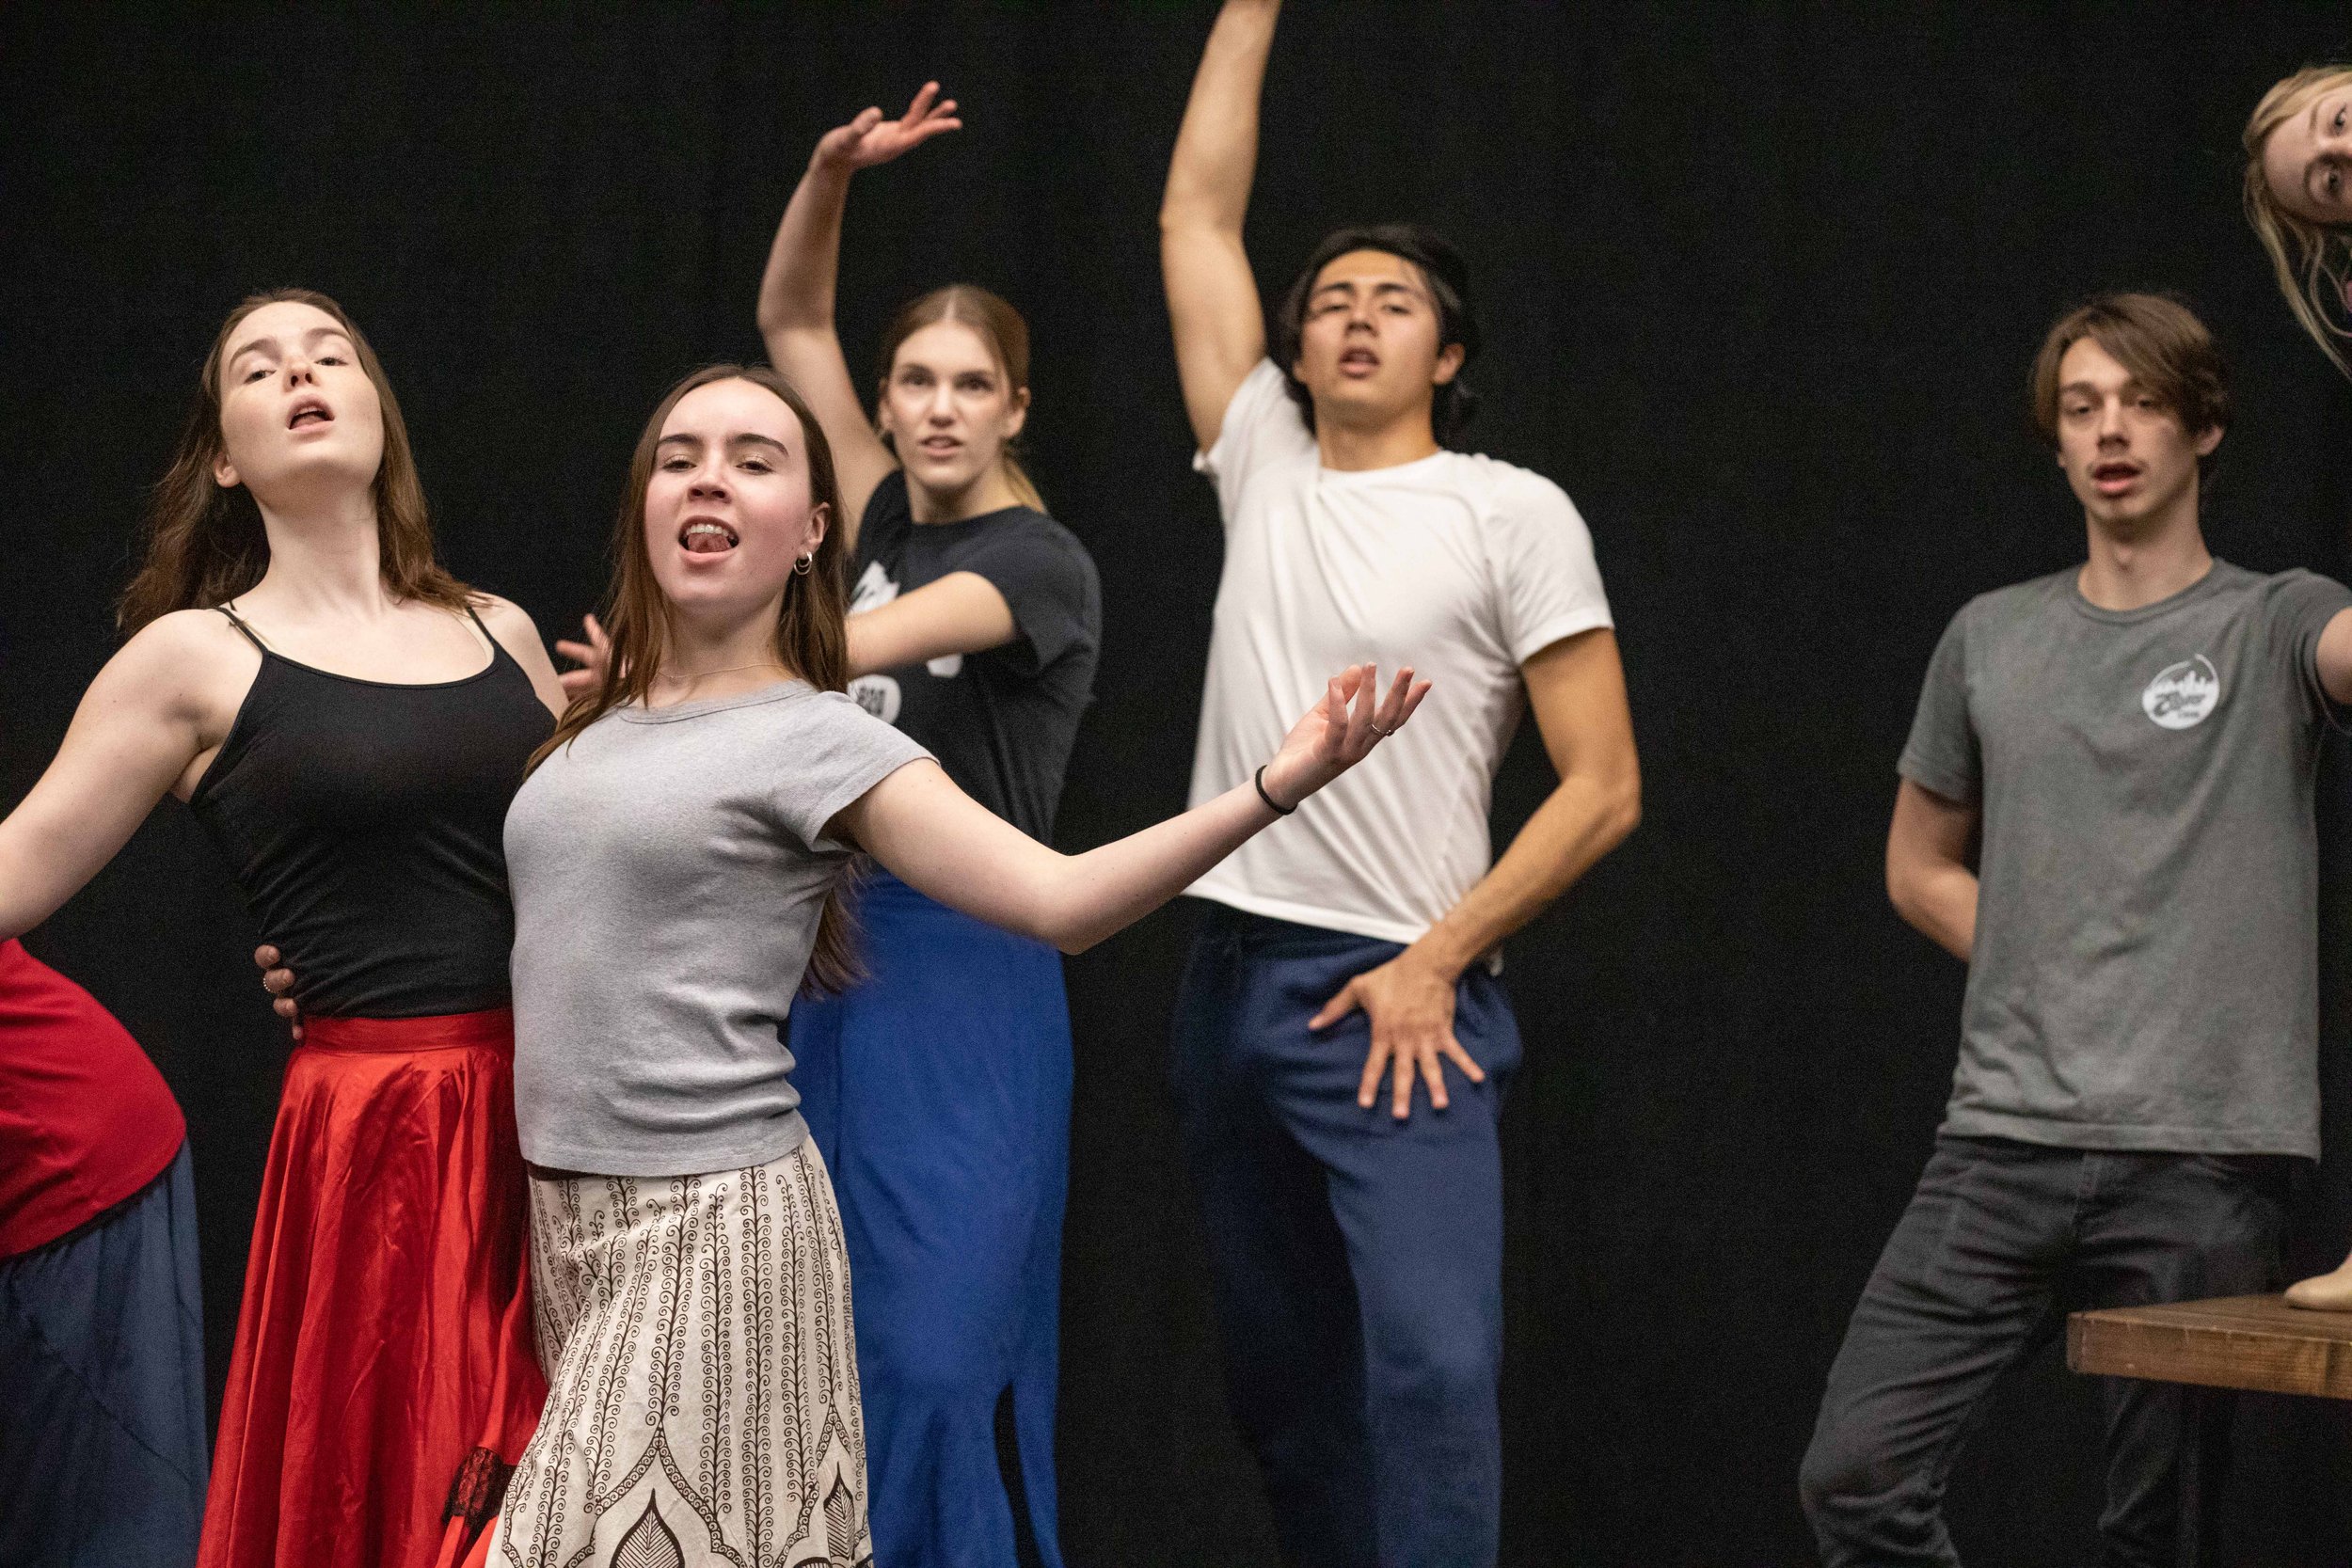  SMC theater students performing at a class rehearsal for the musical “Hunchback of Notredame”. Theater Arts building at SMC main campus, Santa Monica, Calif. March Tuesday 7, 2023. (Jorge Devotto | The Corsair) 